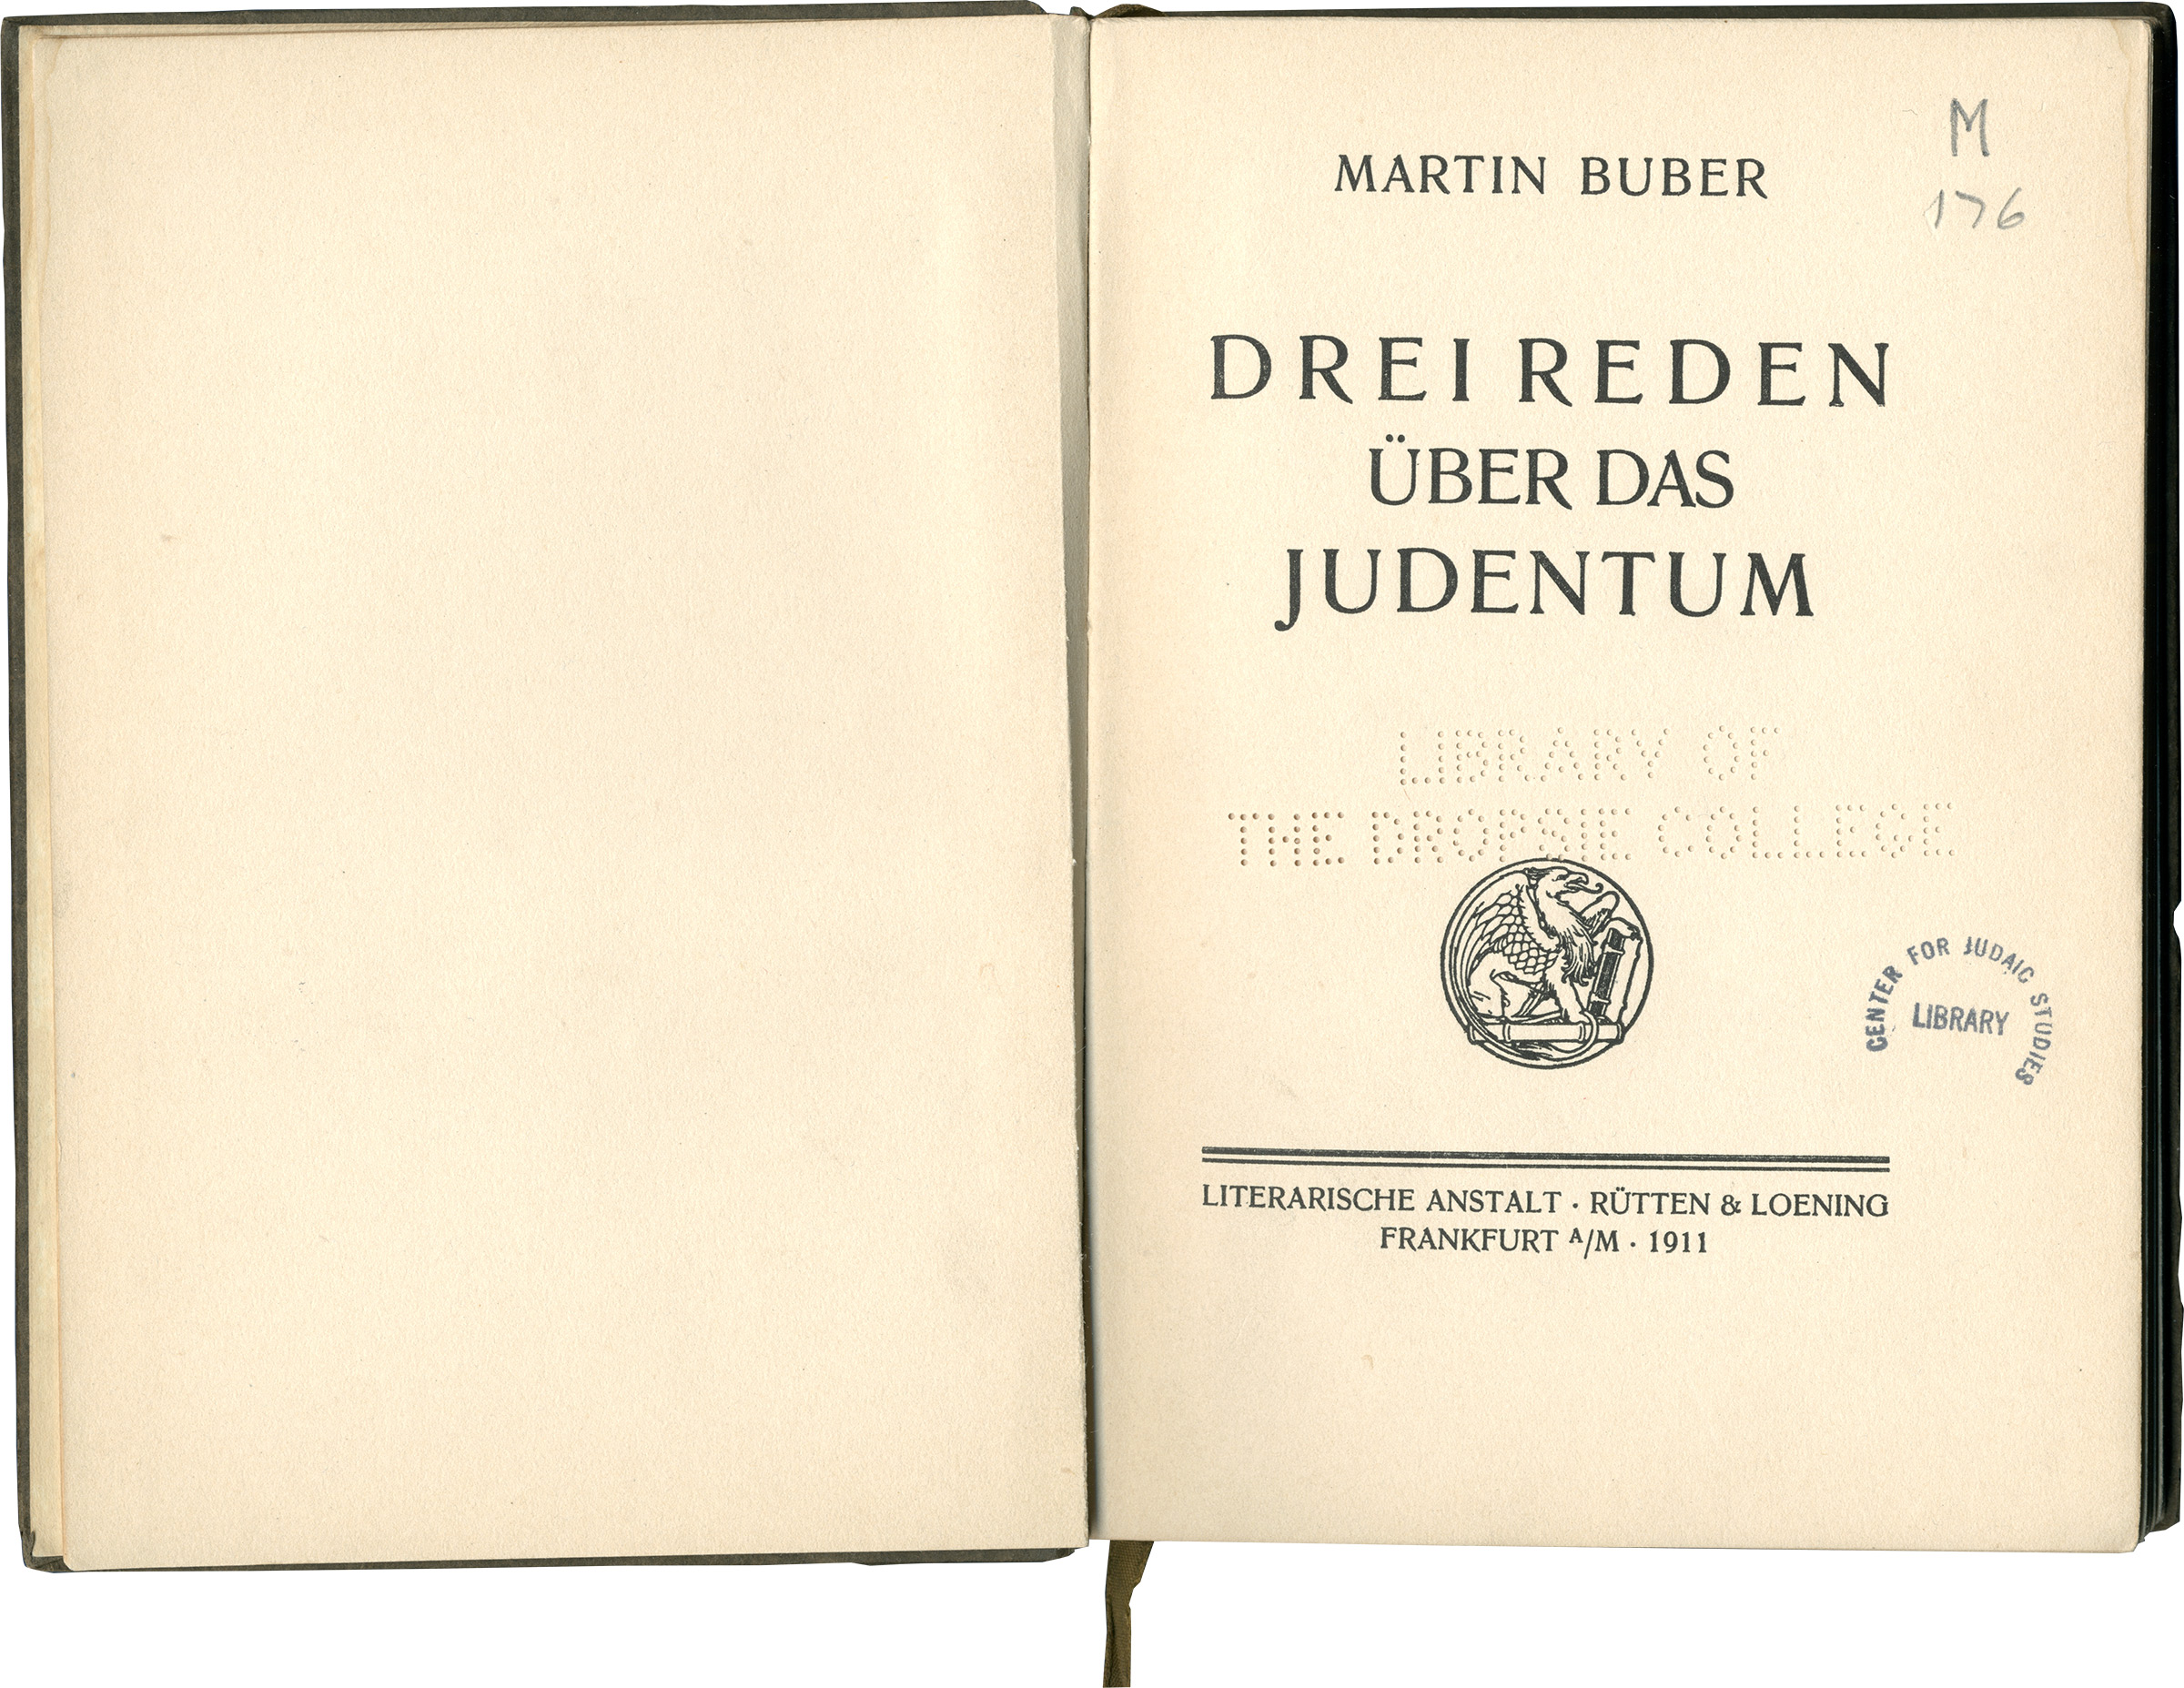 Opening, showing the title page of the first edition